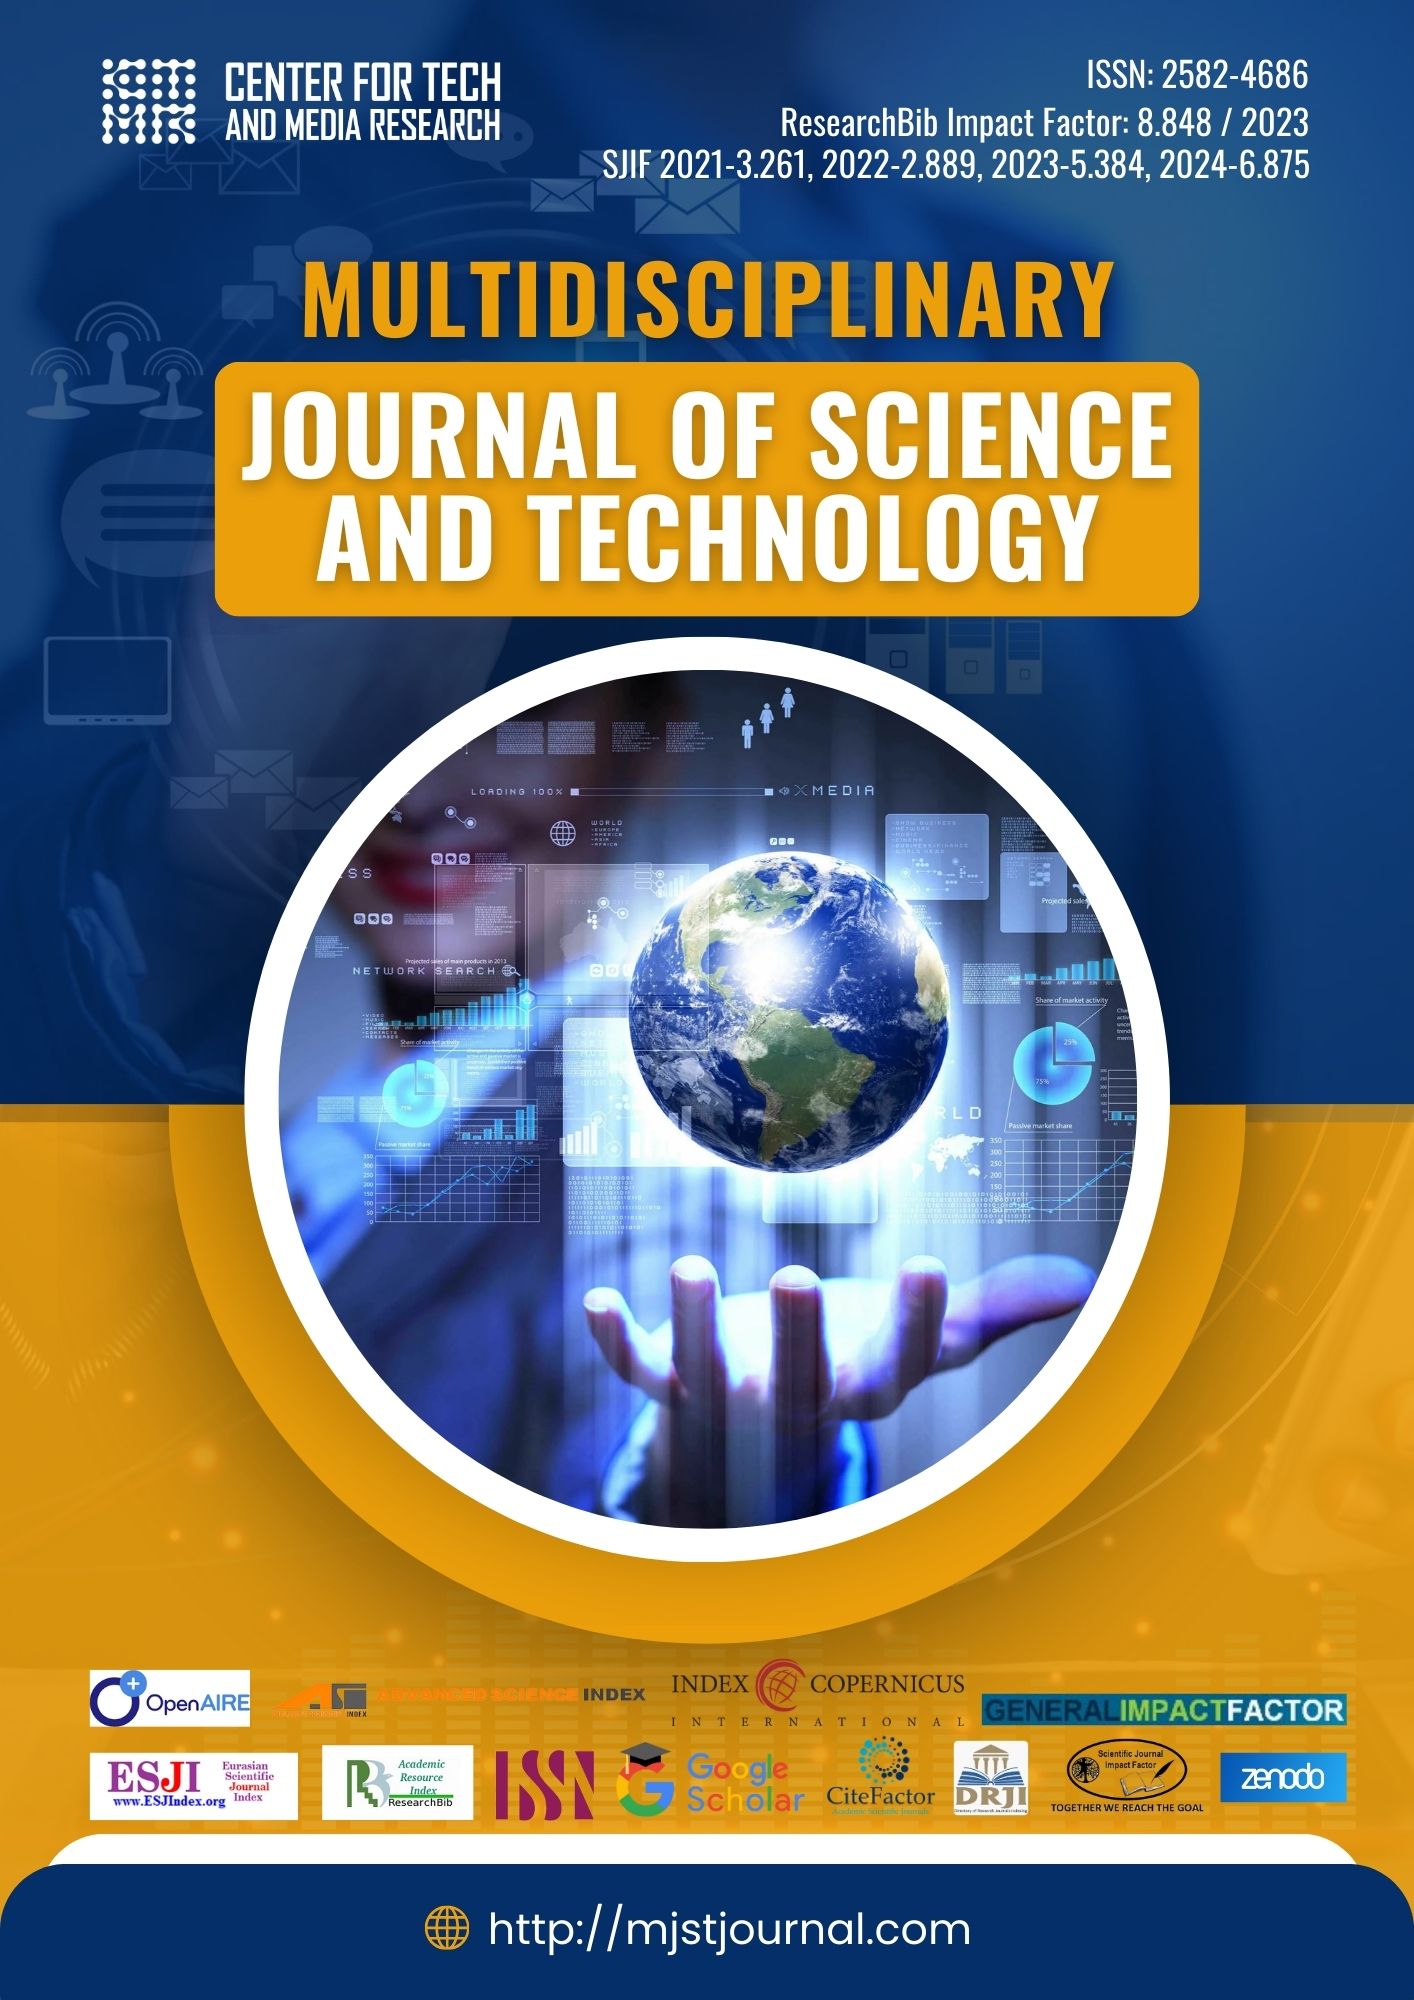                         View Vol. 4 No. 4 (2024): MULTIDISCIPLINARY JOURNAL OF SCIENCE AND TECHNOLOGY
                    